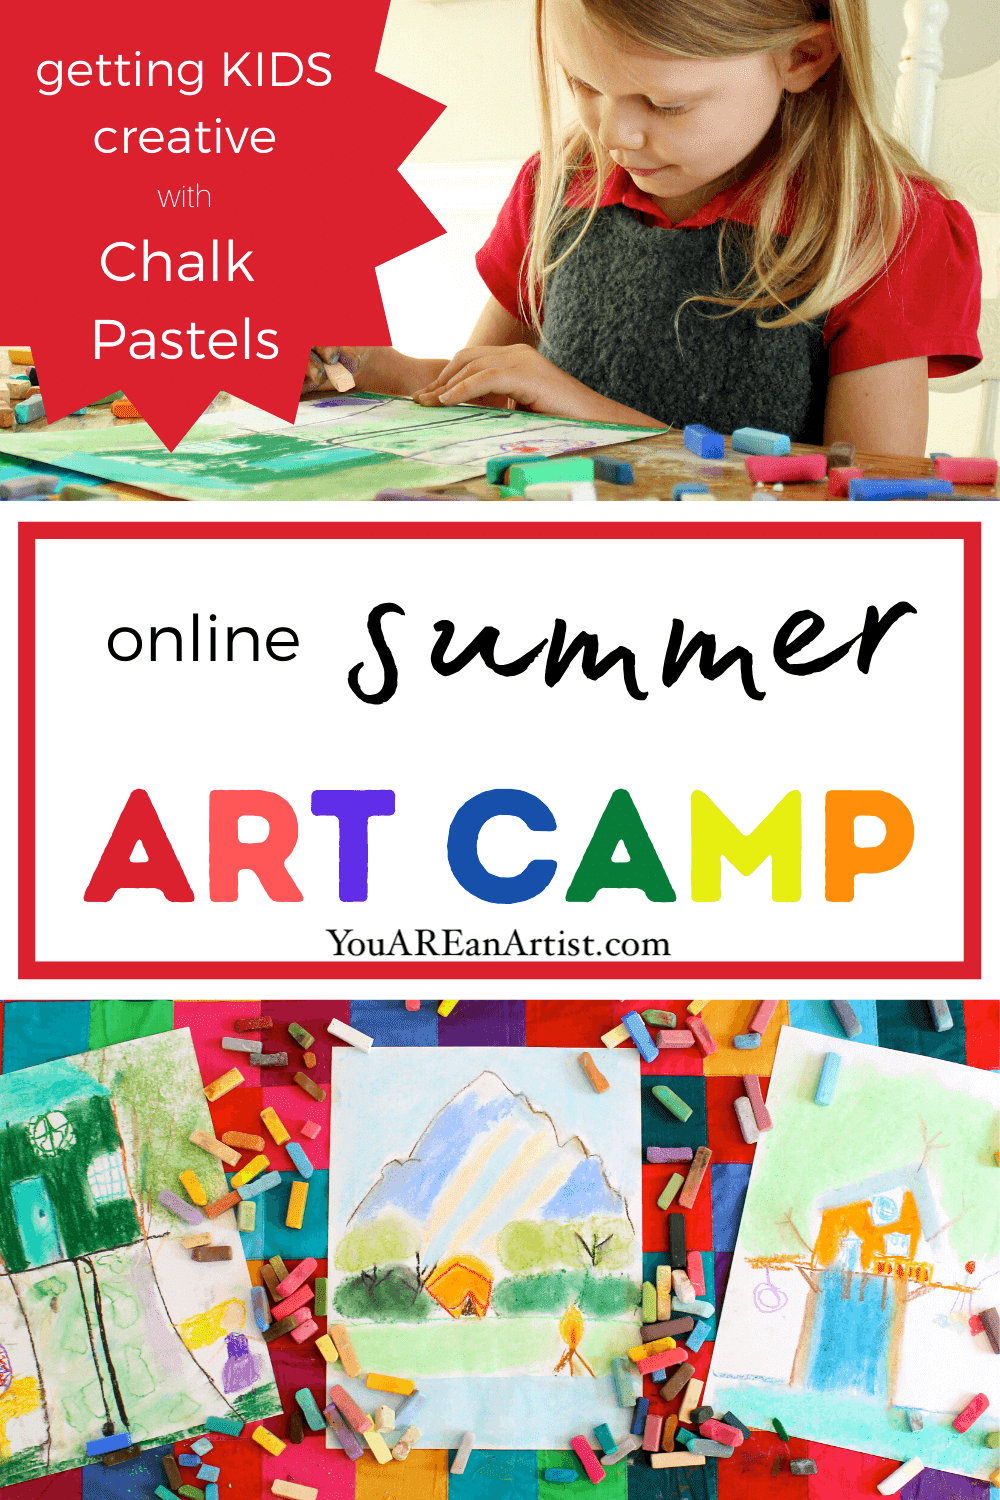 Even if you can’t get your children to a “real” summer art camp this year, I want to encourage you to explore an online camp. With the wonders of technology at our fingertips, this can be an amazing option for many families to choose from. Plus, art camp can be an easy way for kids to learn to express themselves this summer. That’s because art gives children the chance to be creative, carefree, and engaged. Your child will gain self-confidence as they develop the skills and techniques to bring their creations to fruition. No artistic talent needed. Just an openness to creative expression!